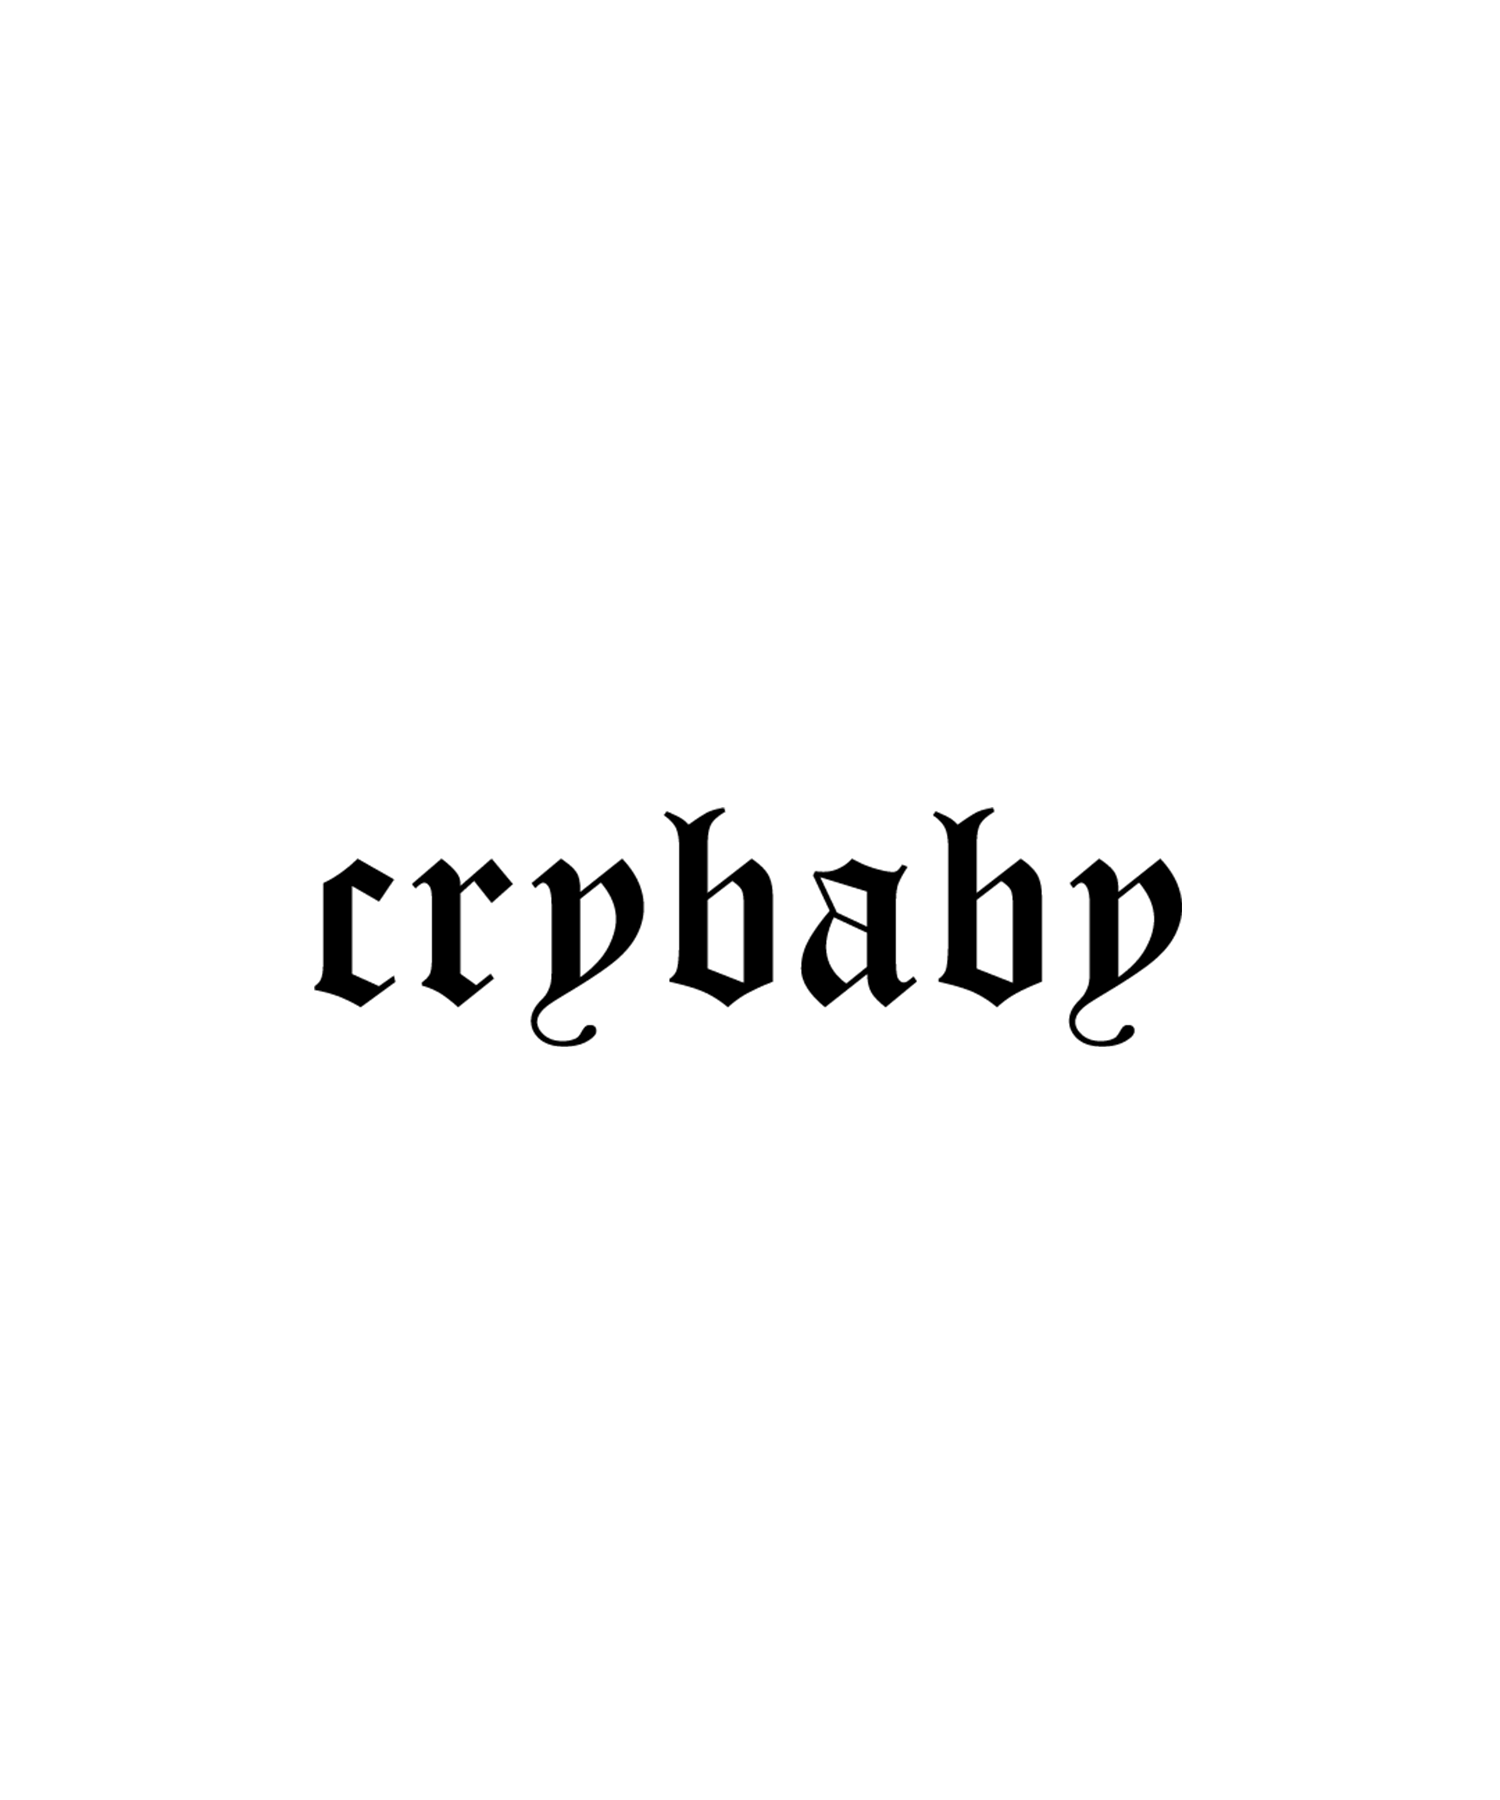 CryBaby  tattoo script download free scetch